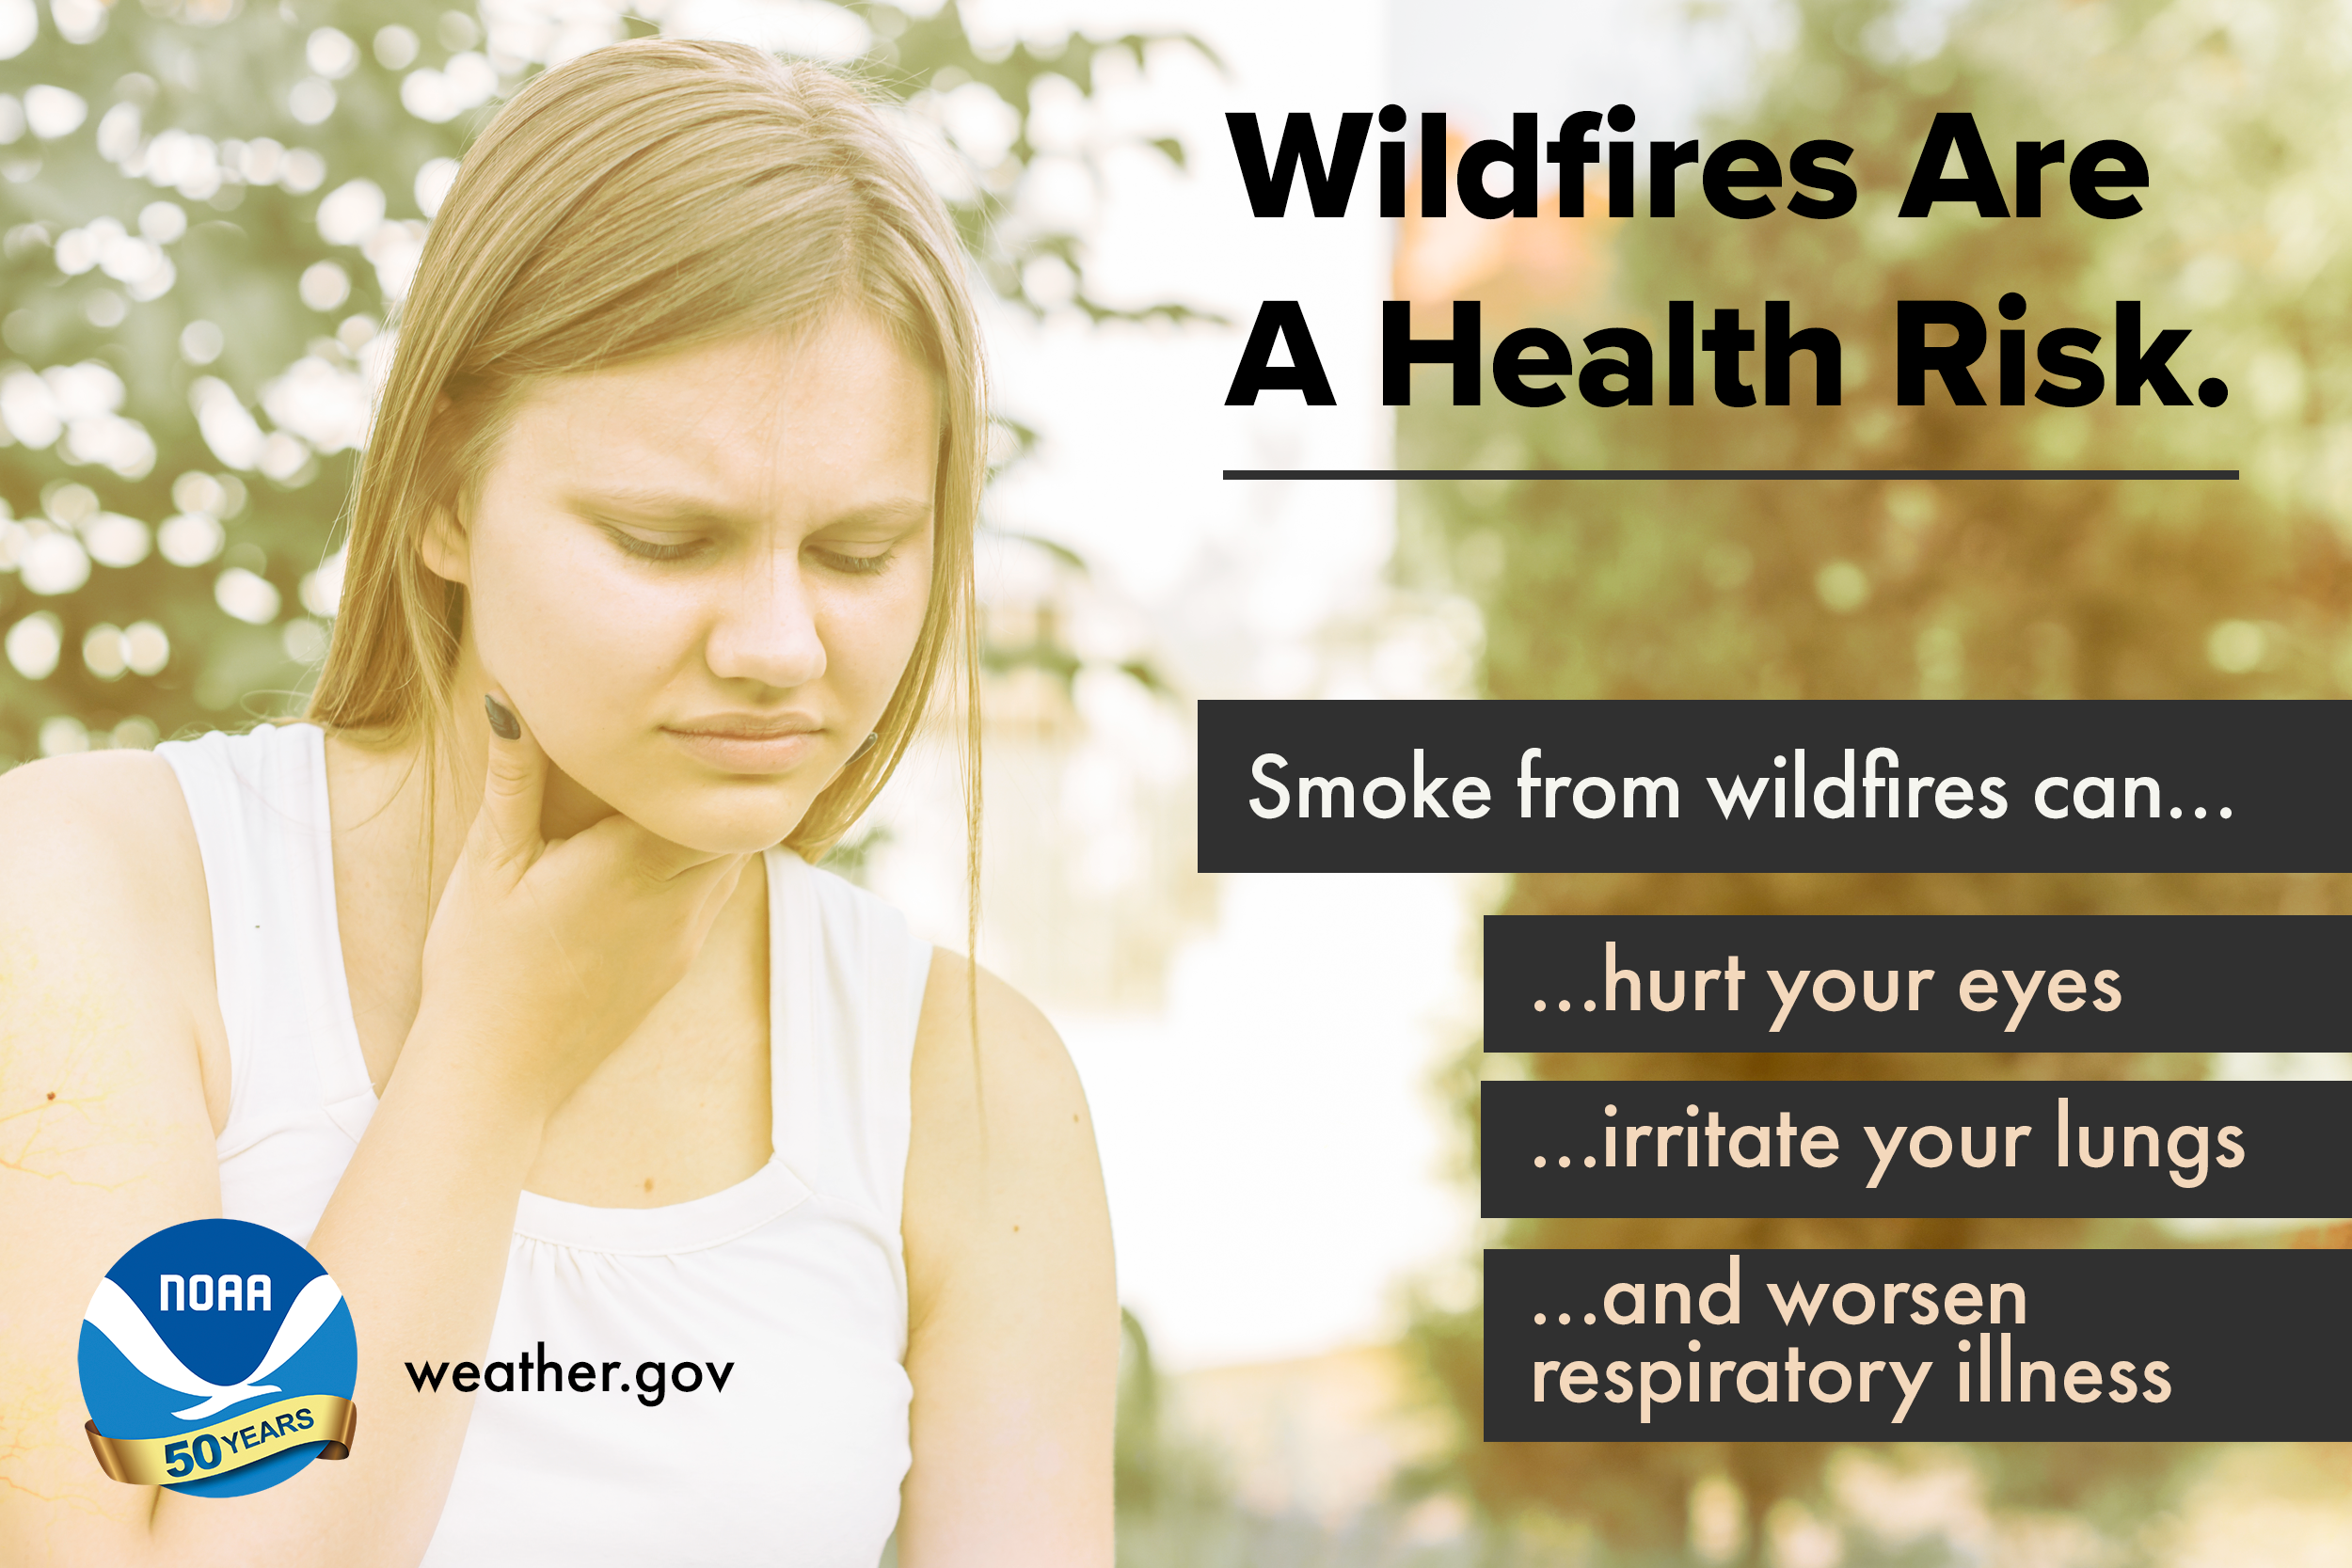 Wildfires are a health risk. Smoke from wildfires can: ...sting your eyes ...irritate your lungs ...and worsen respiratory illness